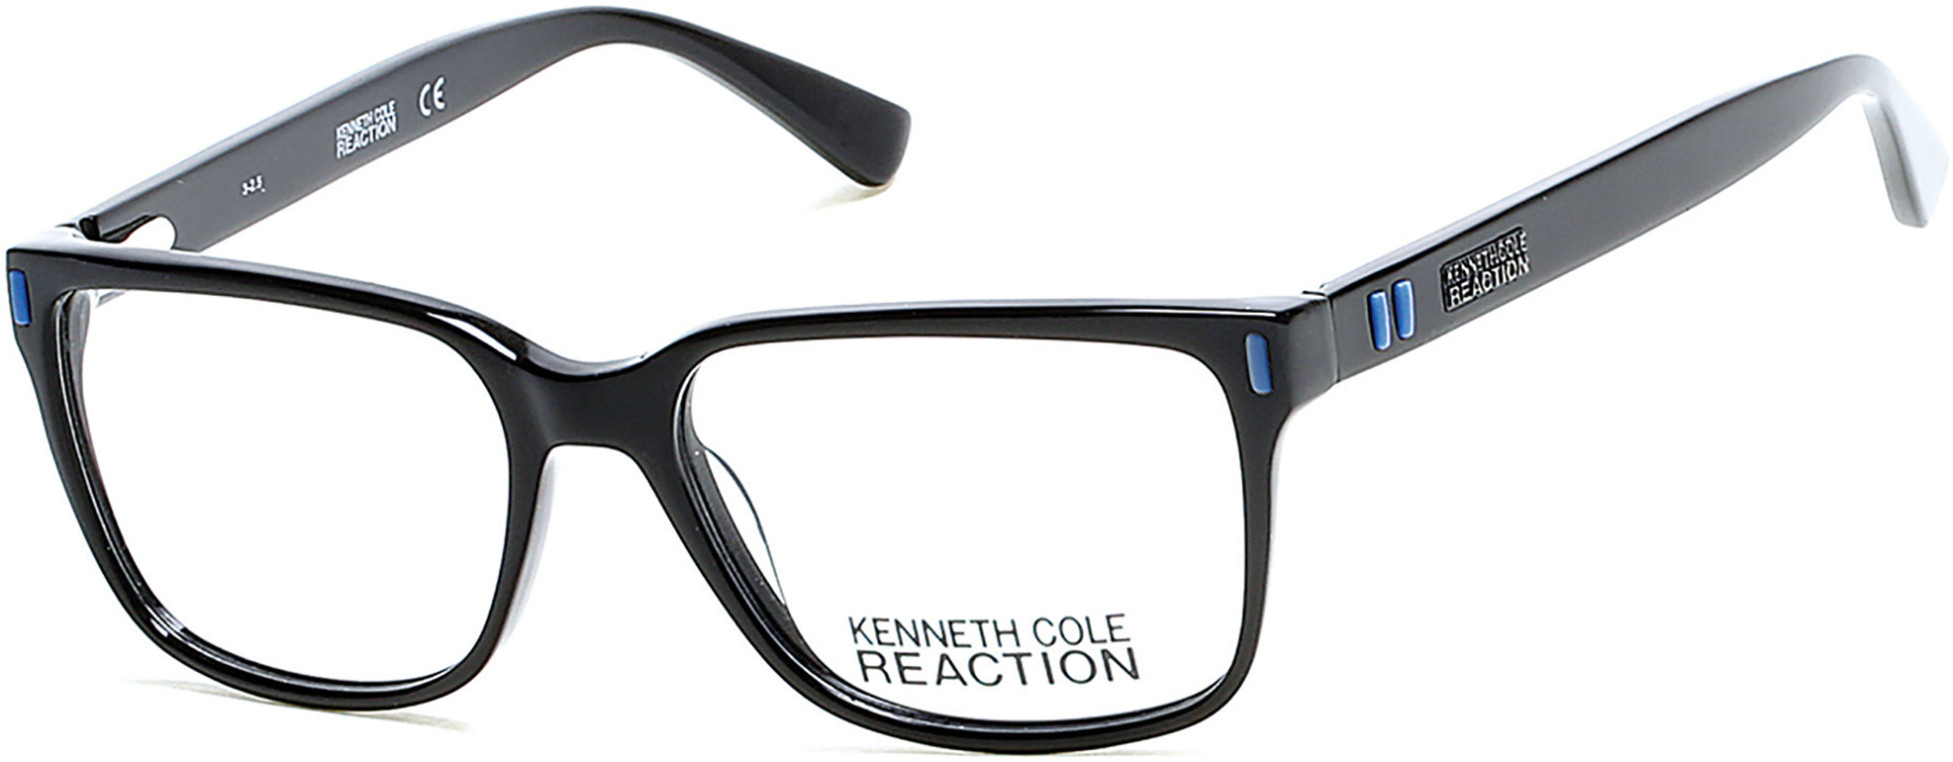 KENNETH COLE NY 0786 001